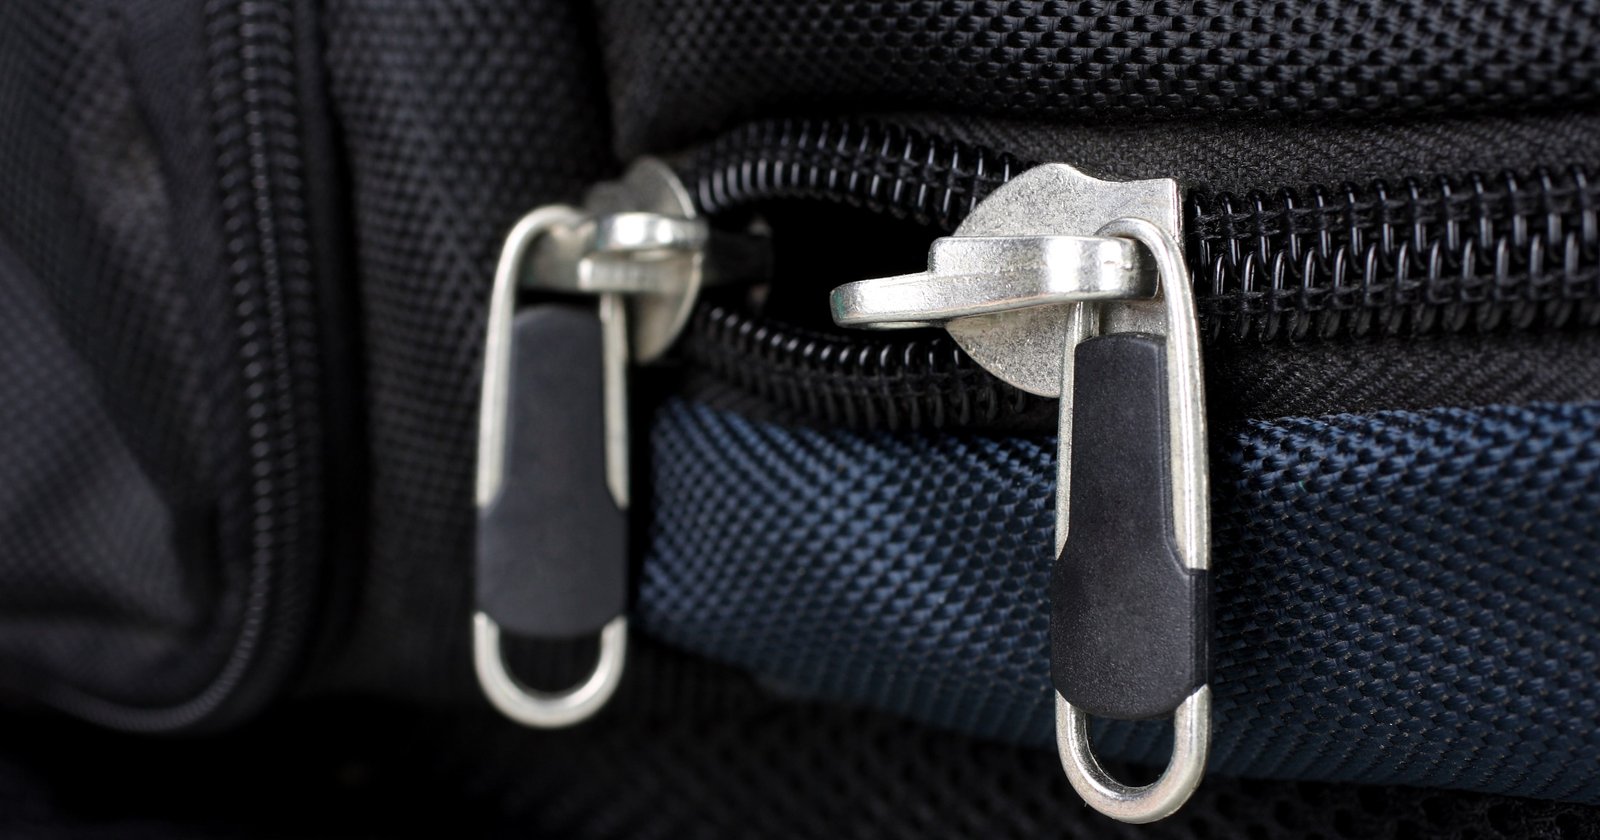 How to Get a Zipper Unstuck on a Backpack